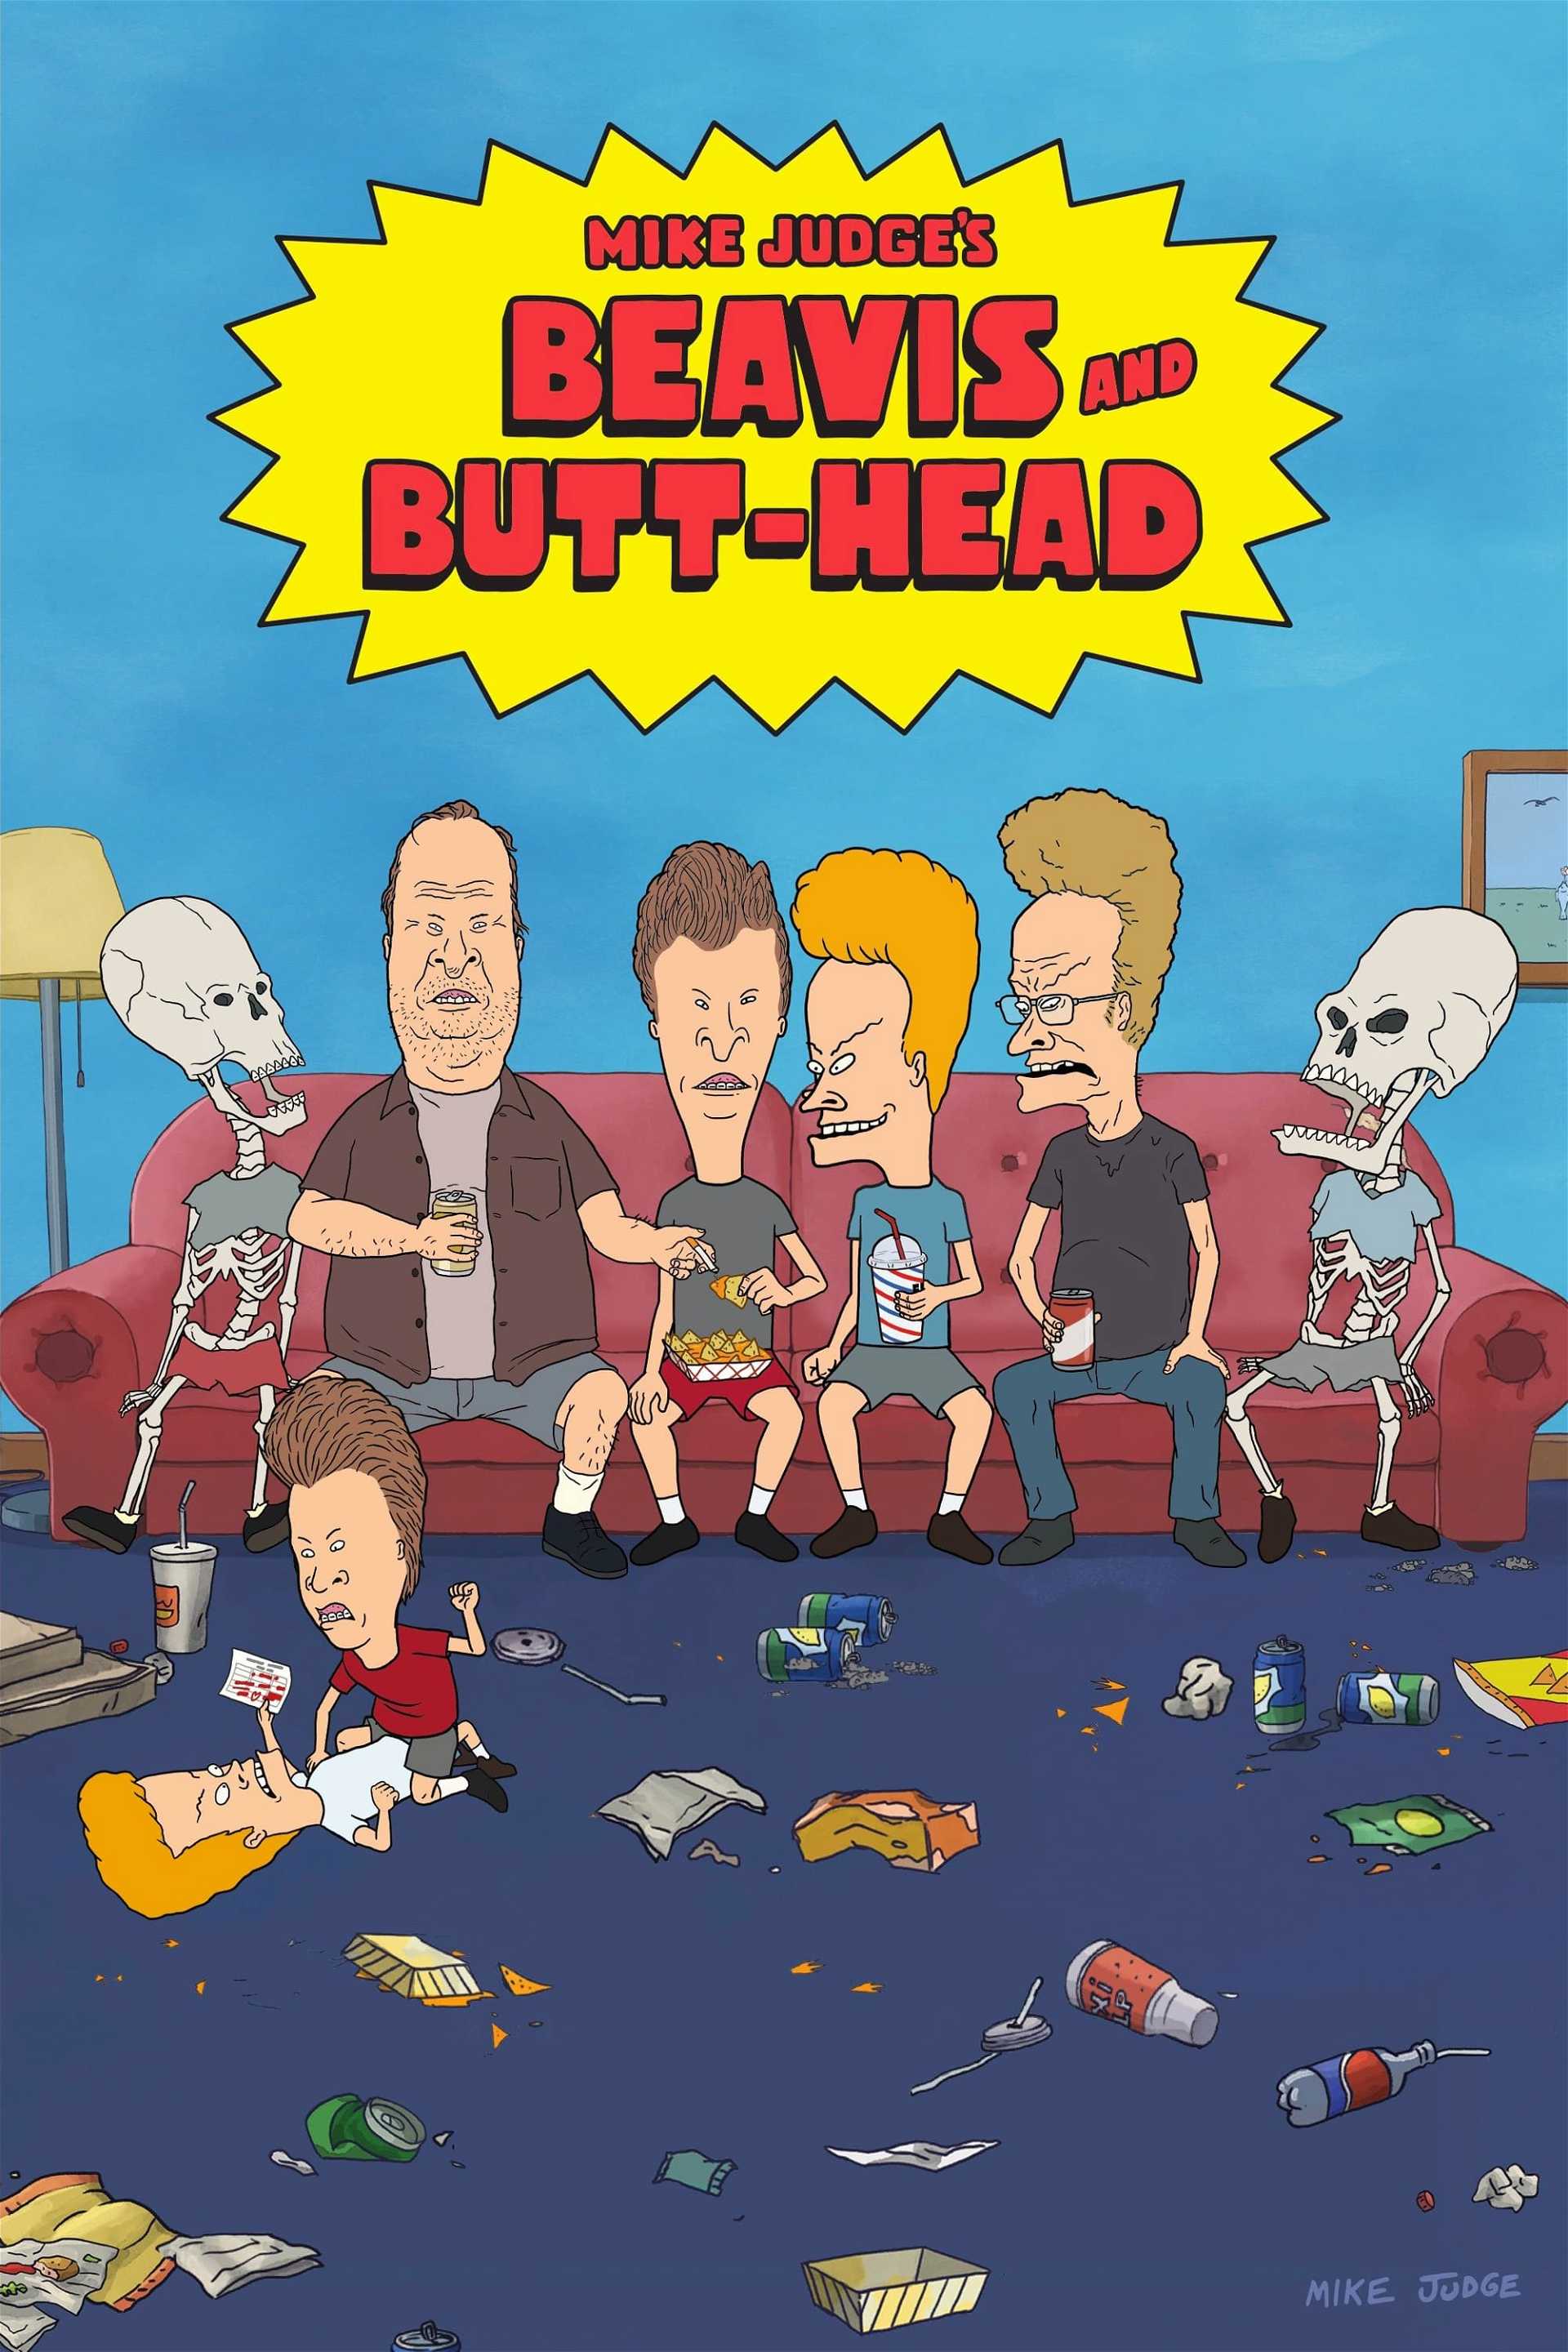 Mike Judge's Beavis and Butt-Head in streaming